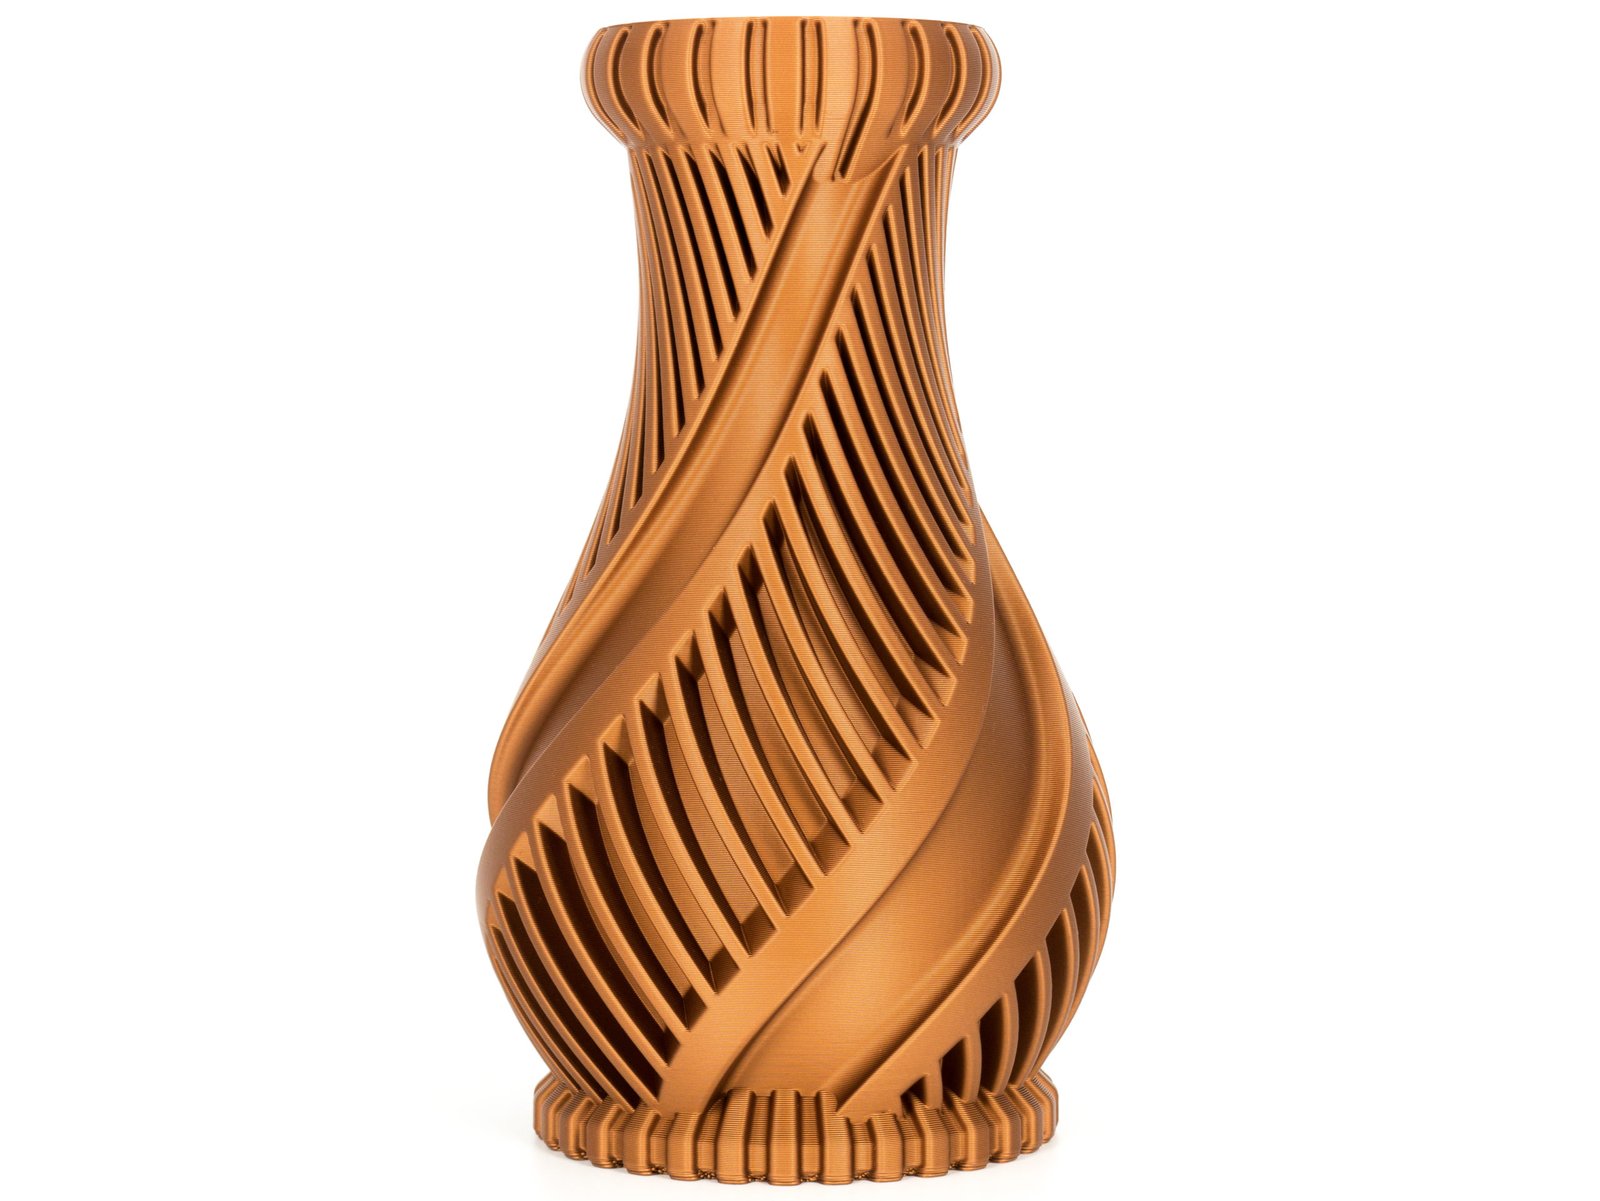 Product: Tactical Vase